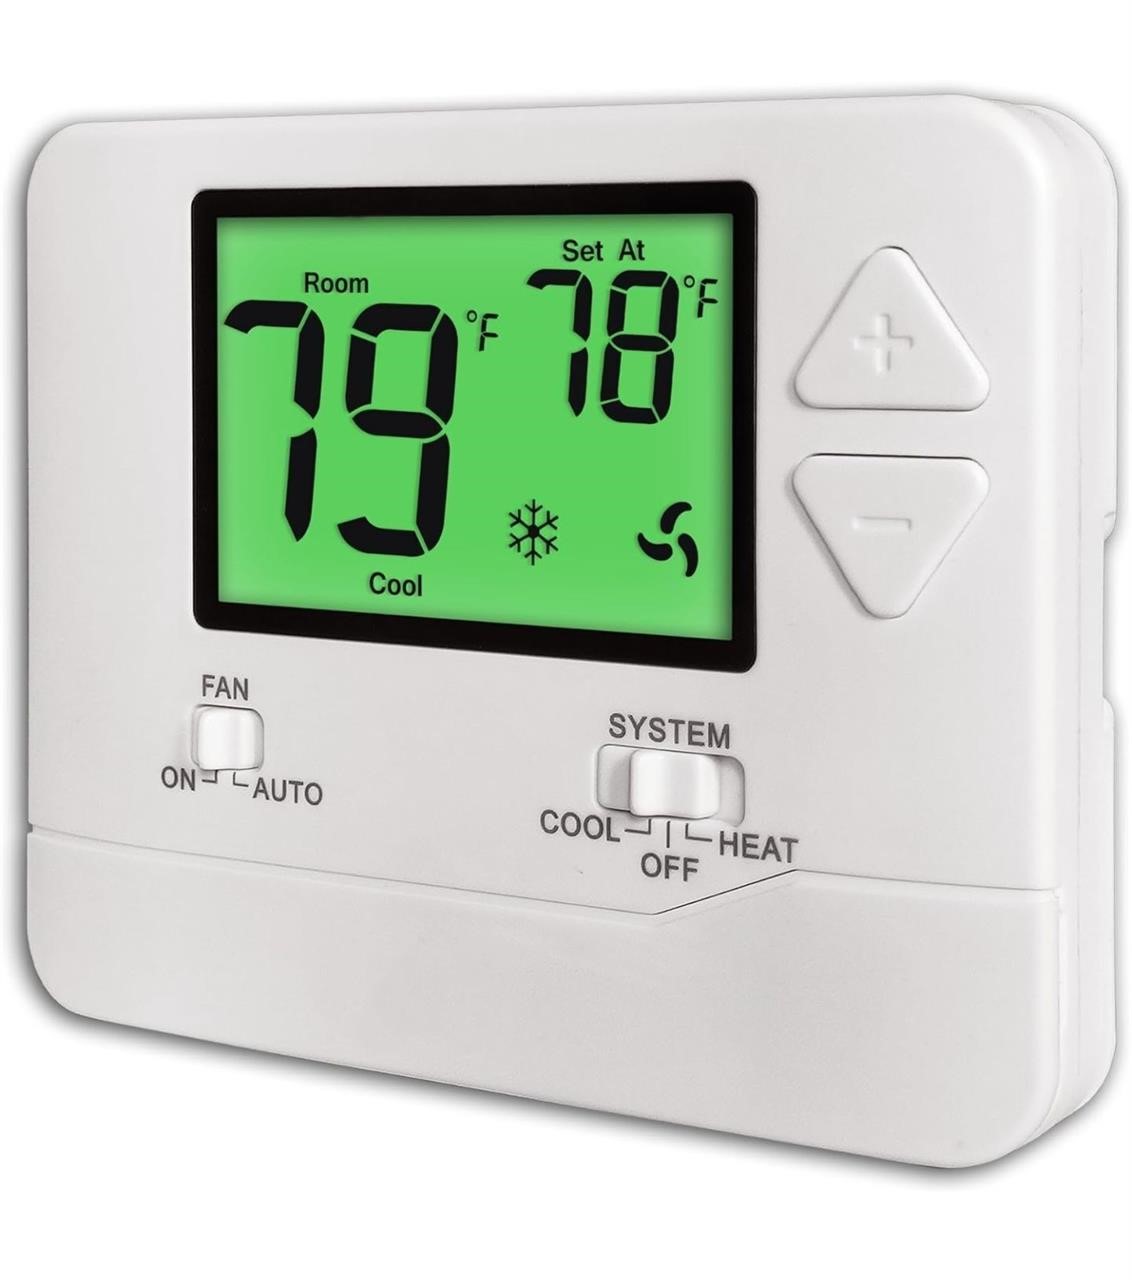 ($40) Non-Programmable Thermostats for H